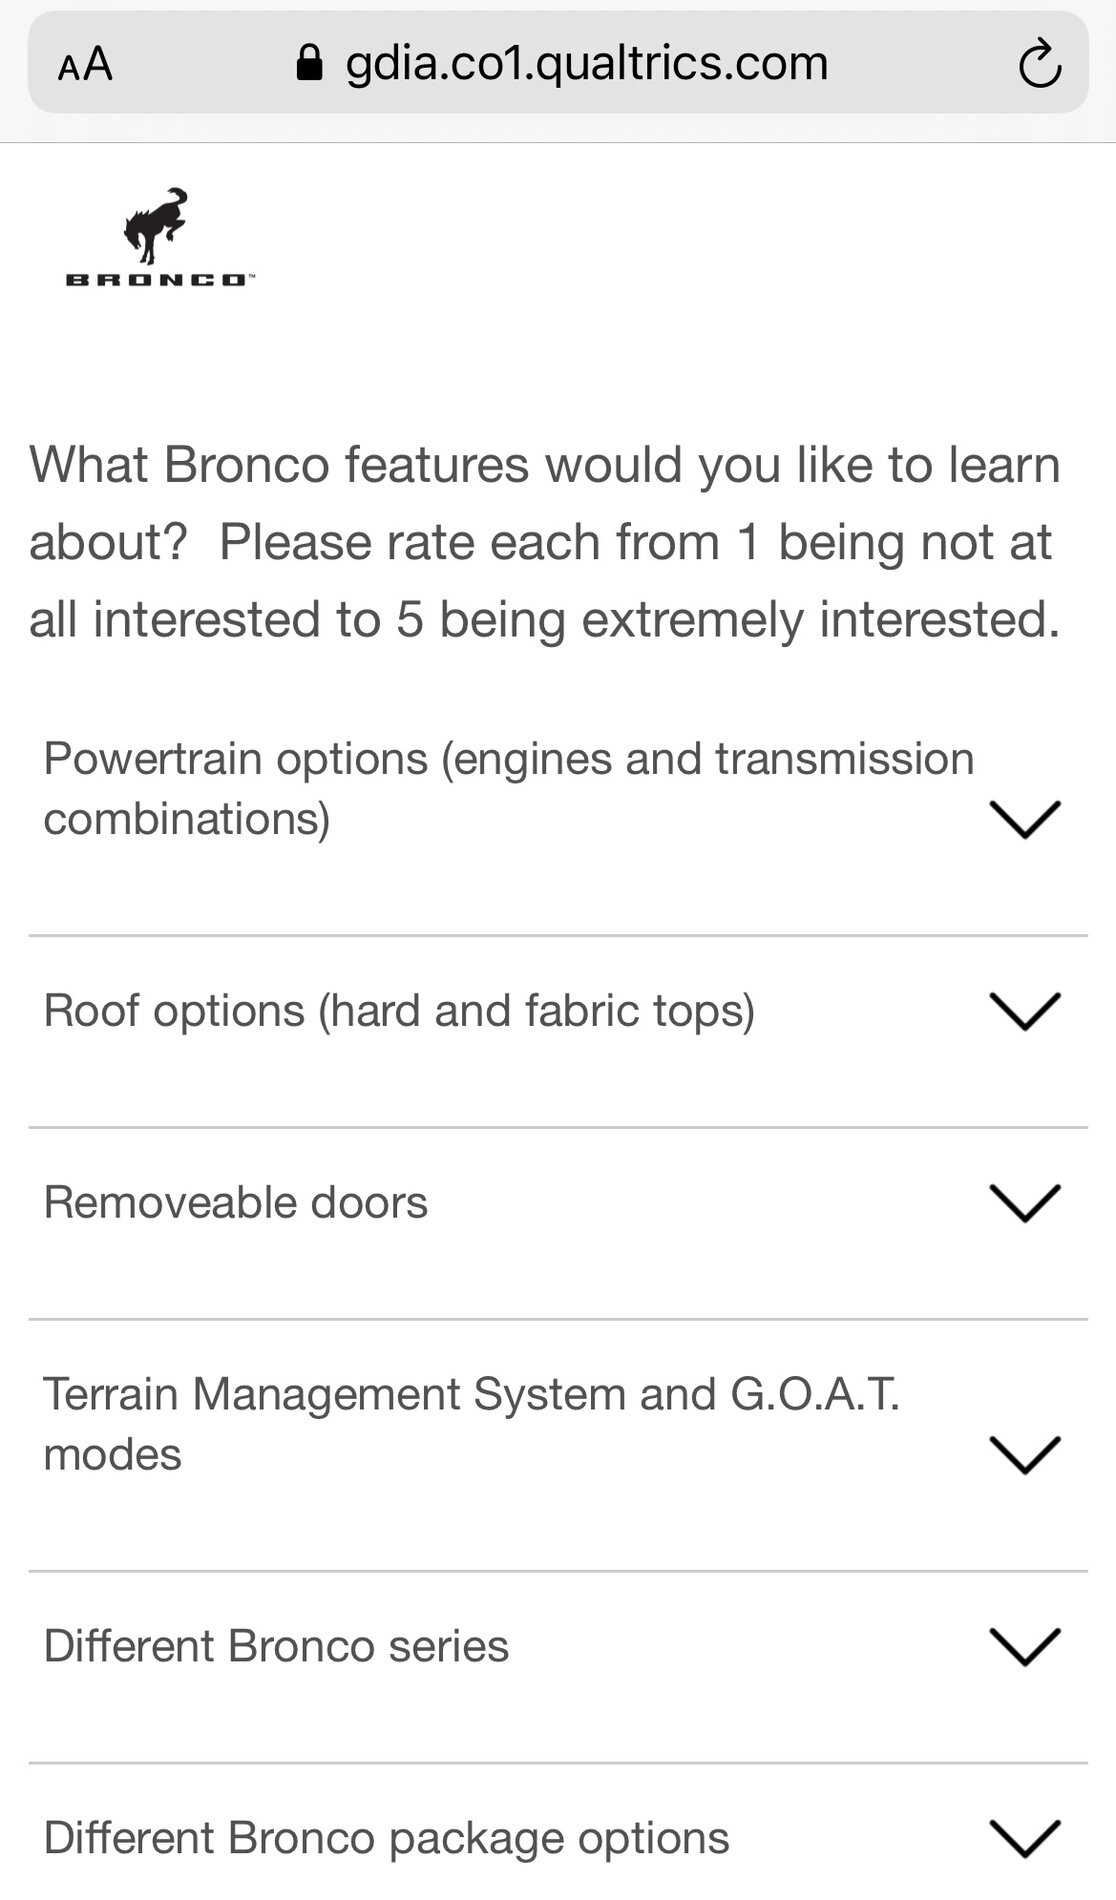 Ford Bronco Ford Sends New Survey: "Bronco Needs Your Help" 867C8A98-8131-4D47-8633-4B5D4801063D